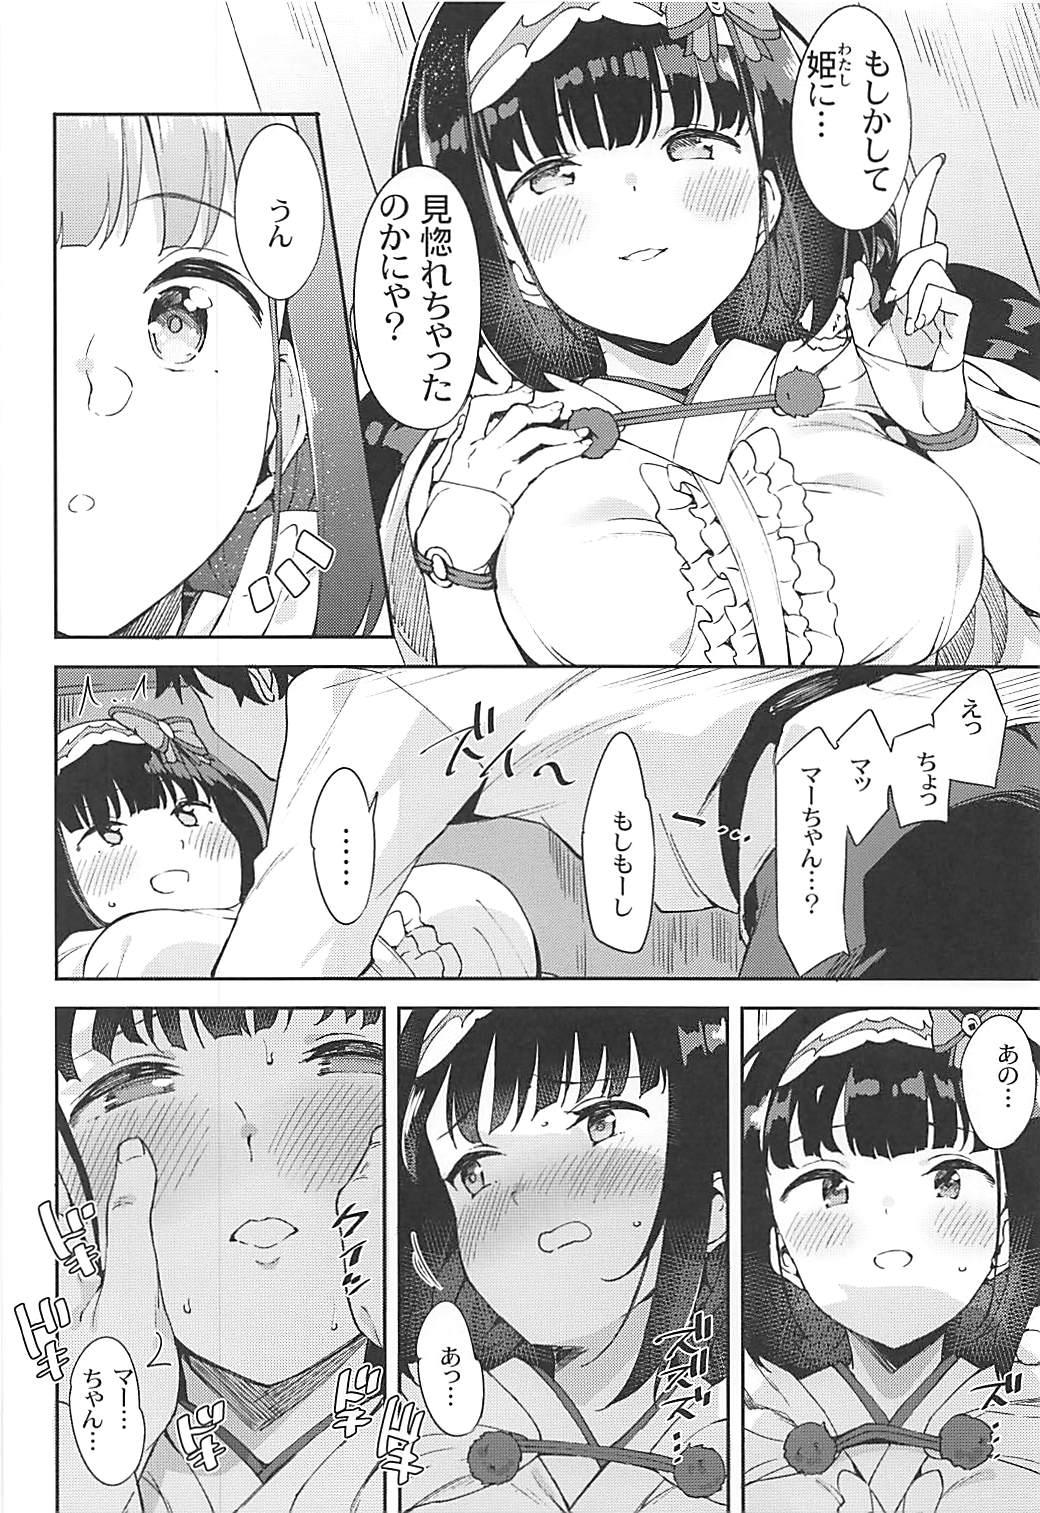 Stepbrother Osakabehime to Himegoto - Fate grand order Cam Girl - Page 7